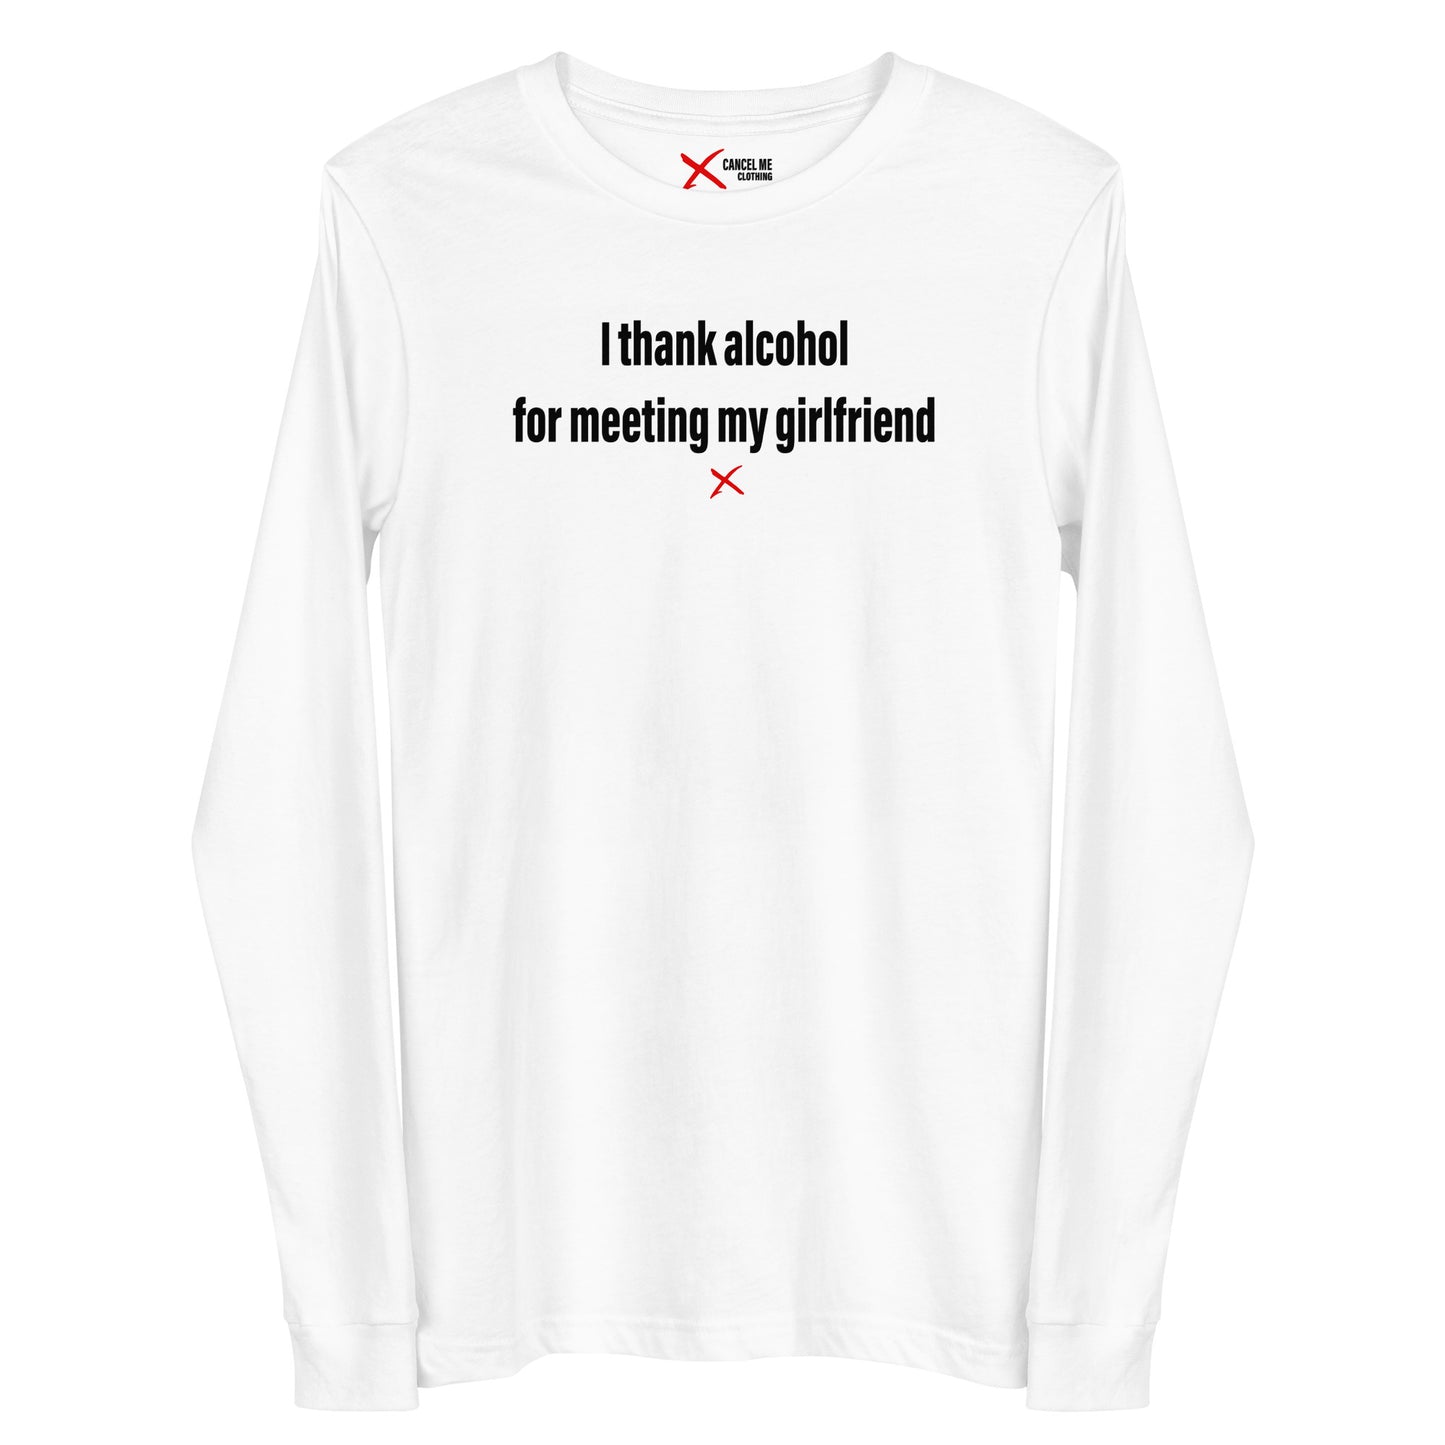 I thank alcohol for meeting my girlfriend - Longsleeve